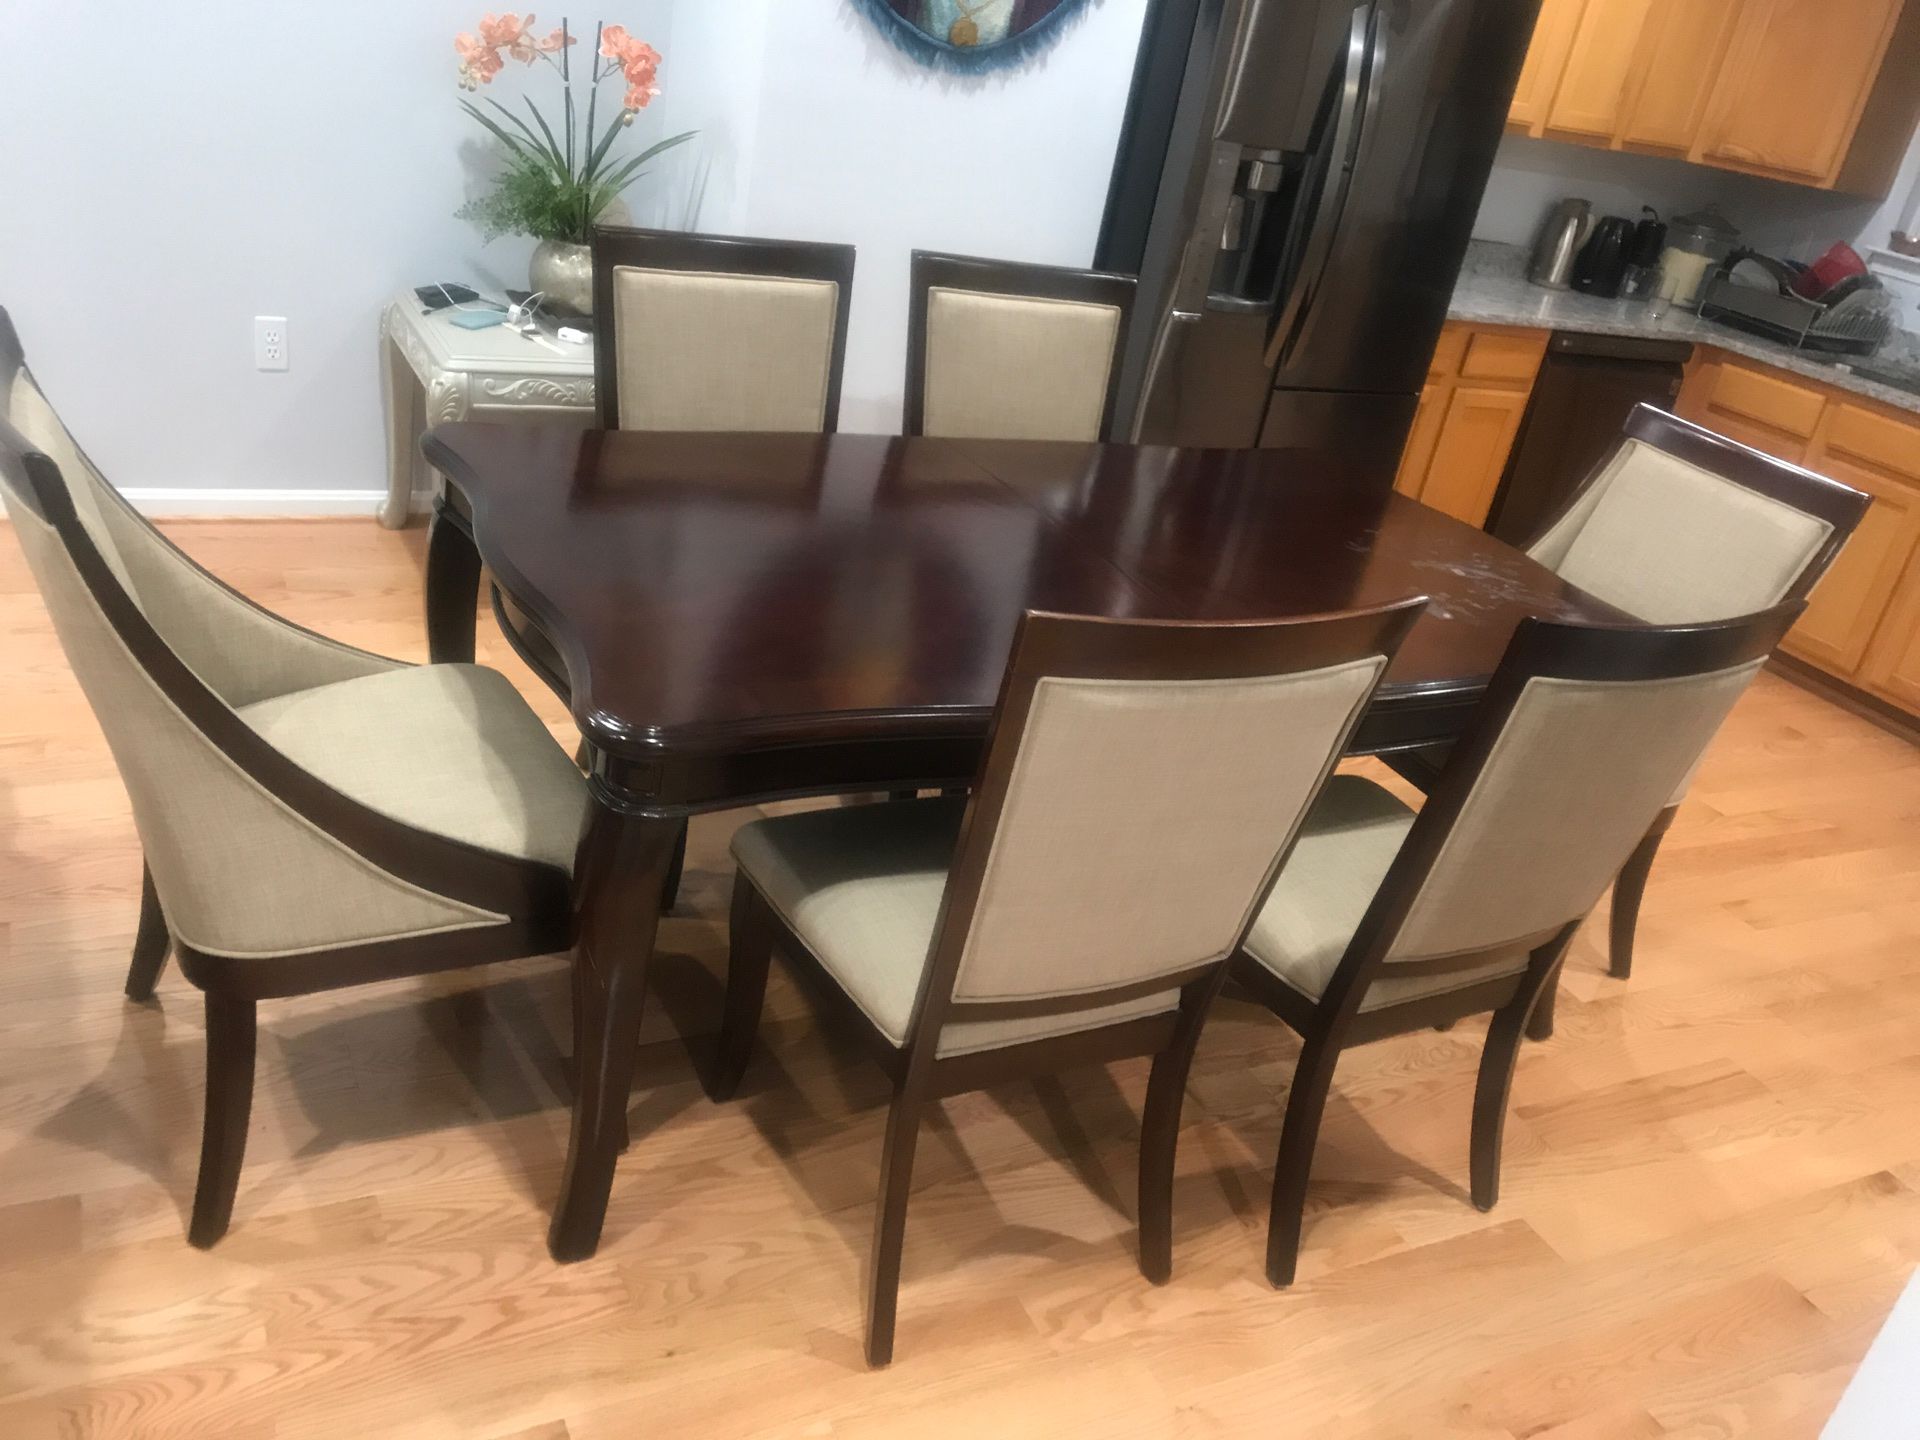 Dining room set, 72 inch table 6 chairs included